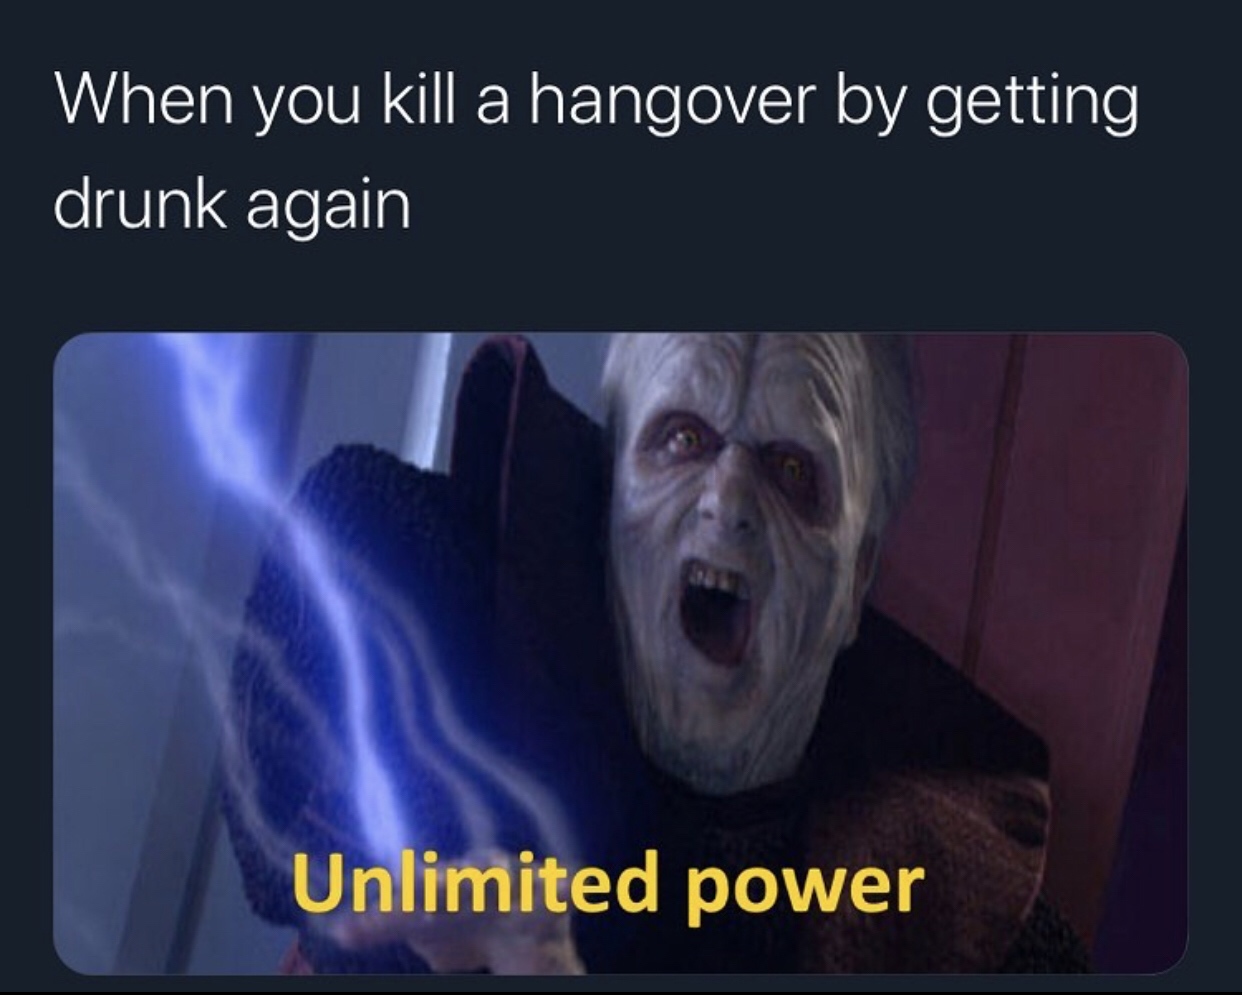 unlimited power star wars - When you kill a hangover by getting drunk again Unlimited power